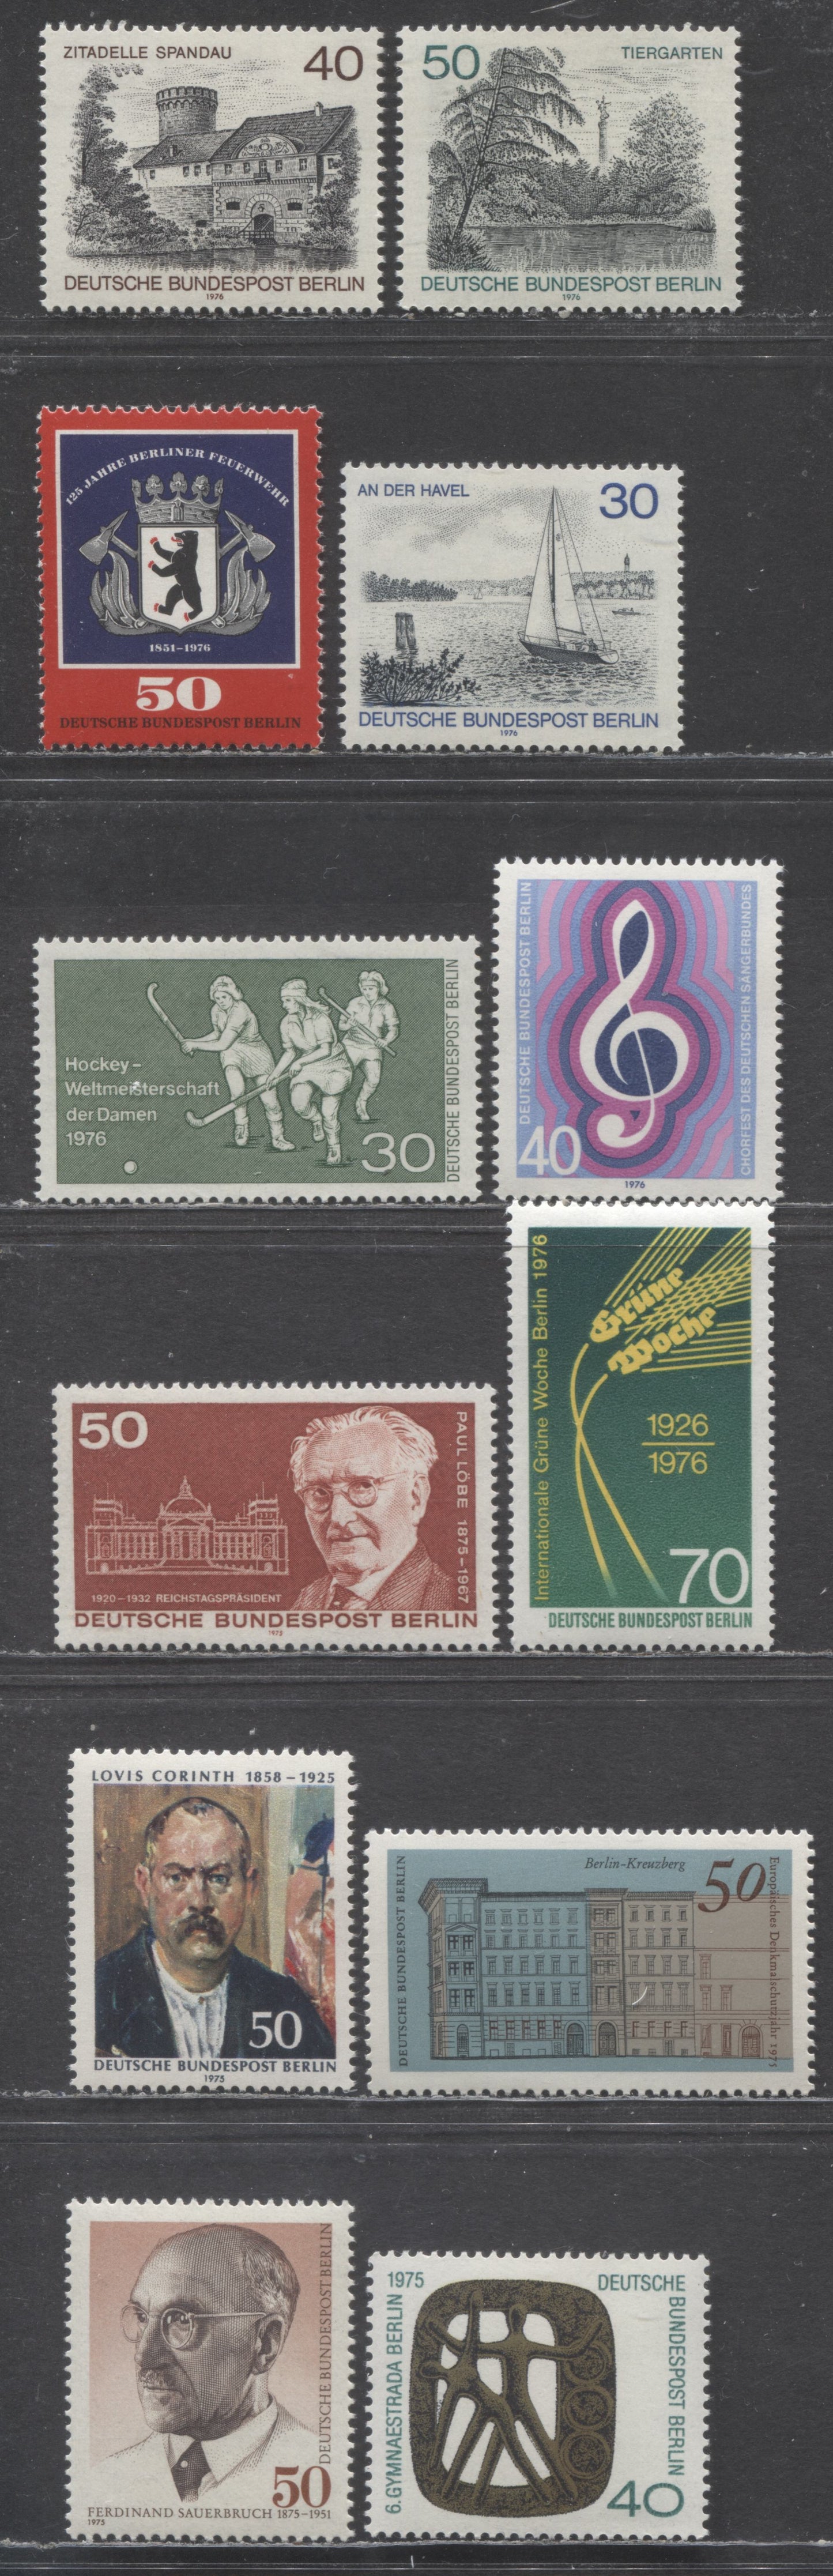 Berlin-Germany SC#9N379-9N390(Mi#492/531) 1972 Saurbruch - Berlin Views Issues, 12 VFNH Singles, Click on Listing to See ALL Pictures, Estimated Value $10 USD